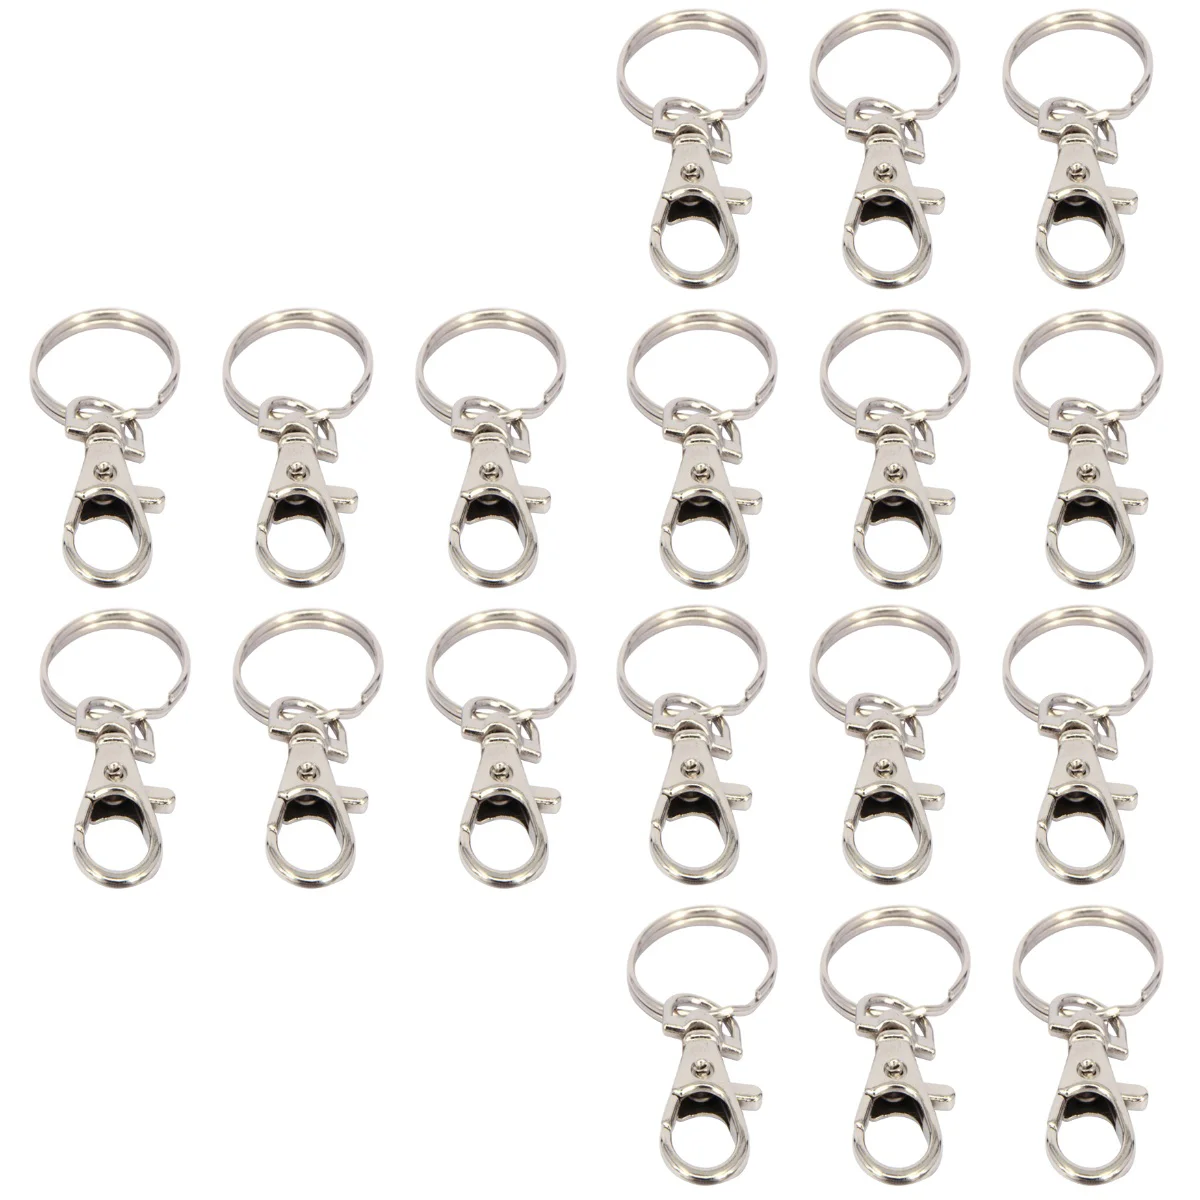 

30 pcs Metal Swivel Lobster Keychain Car Keyring Clasp Clip Trigger Buckle Snap Hook with Split Ring